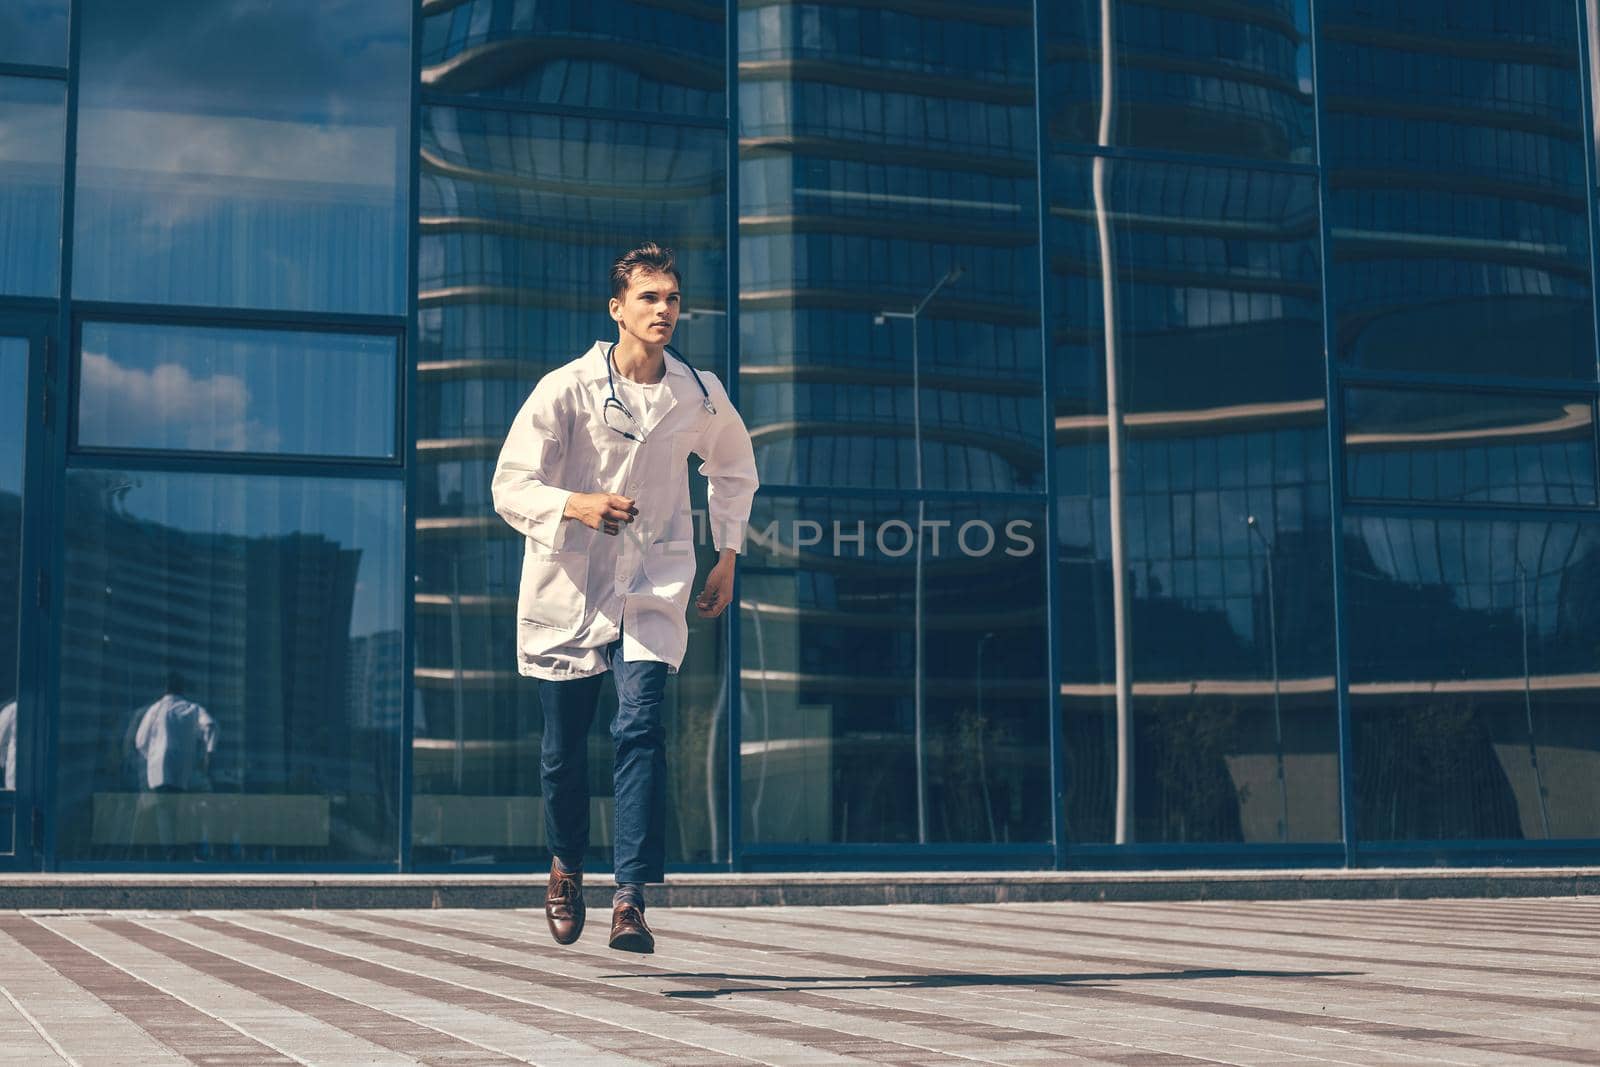 in full growth. a concerned doctor runs to help. by SmartPhotoLab